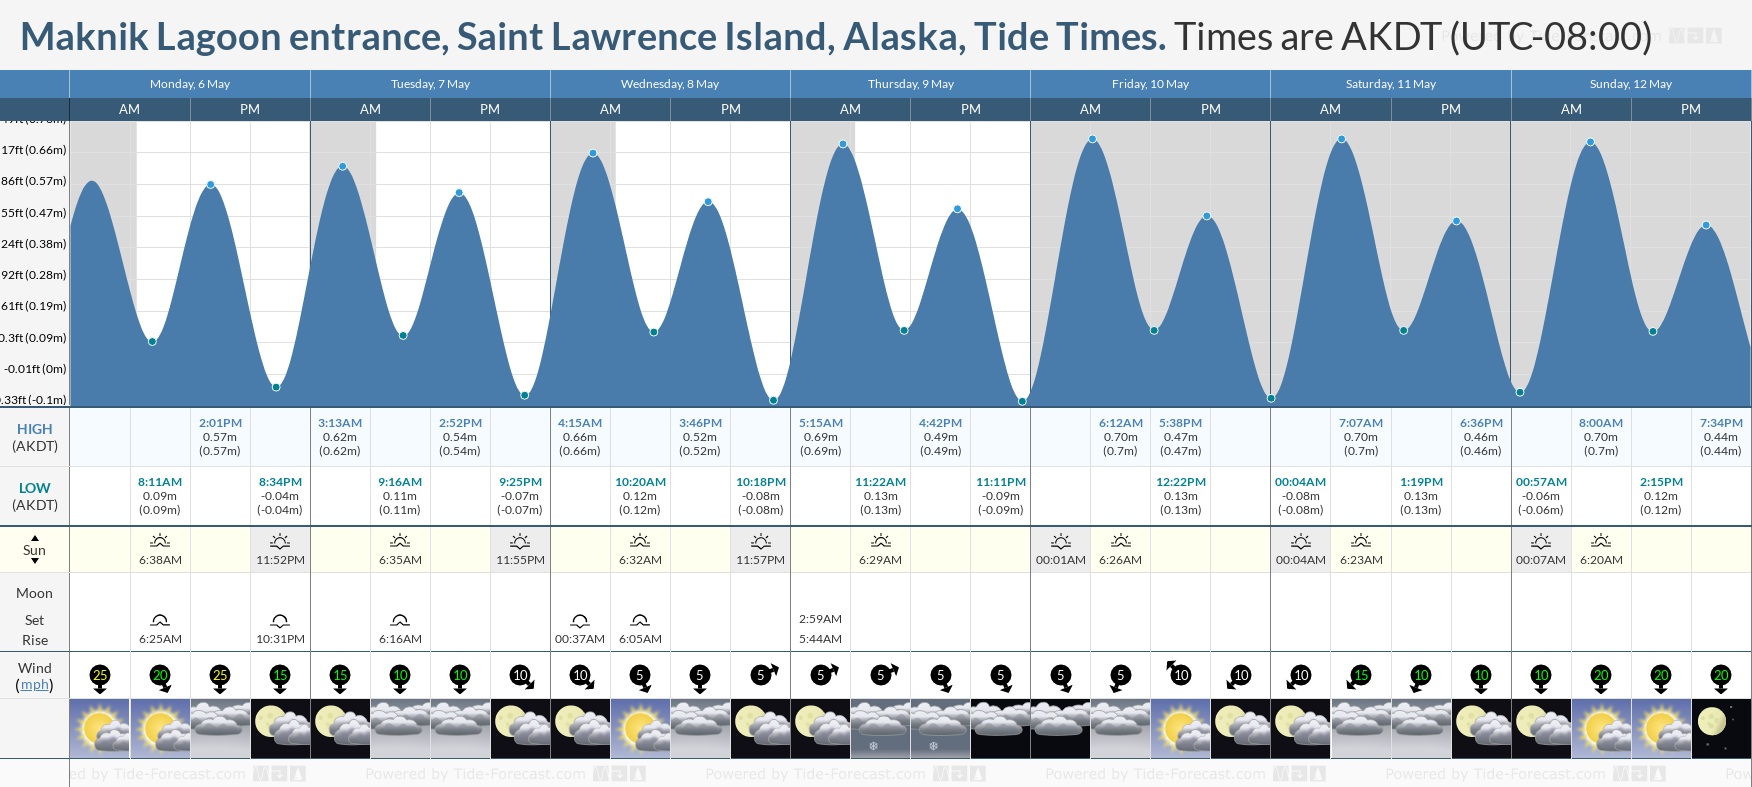 Maknik Lagoon entrance, Saint Lawrence Island, Alaska Tide Chart including high and low tide times for the next 7 days